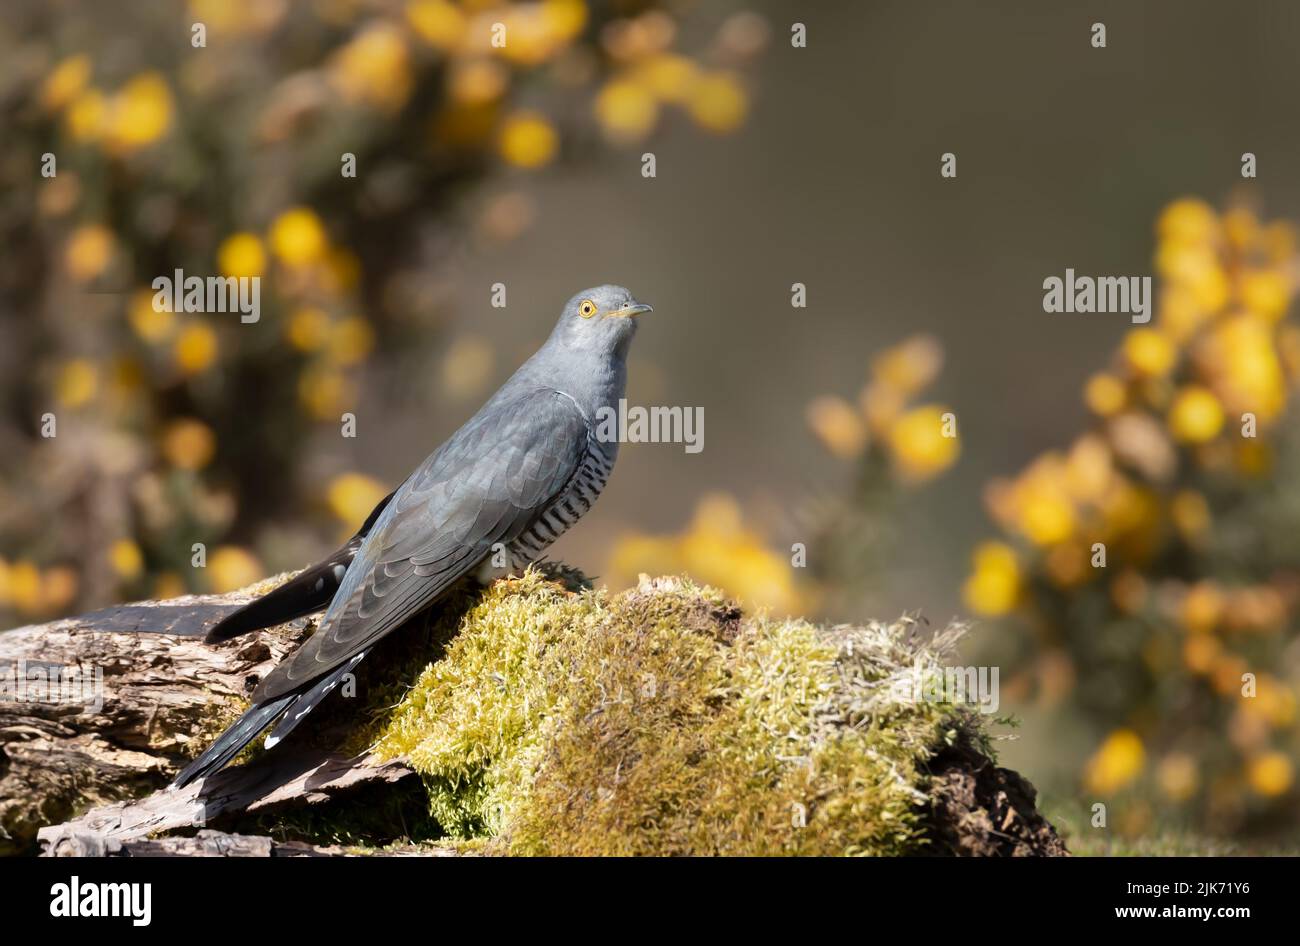 Close up of a Common Cuckoo perched on a mossy tree trunk, UK. Stock Photo